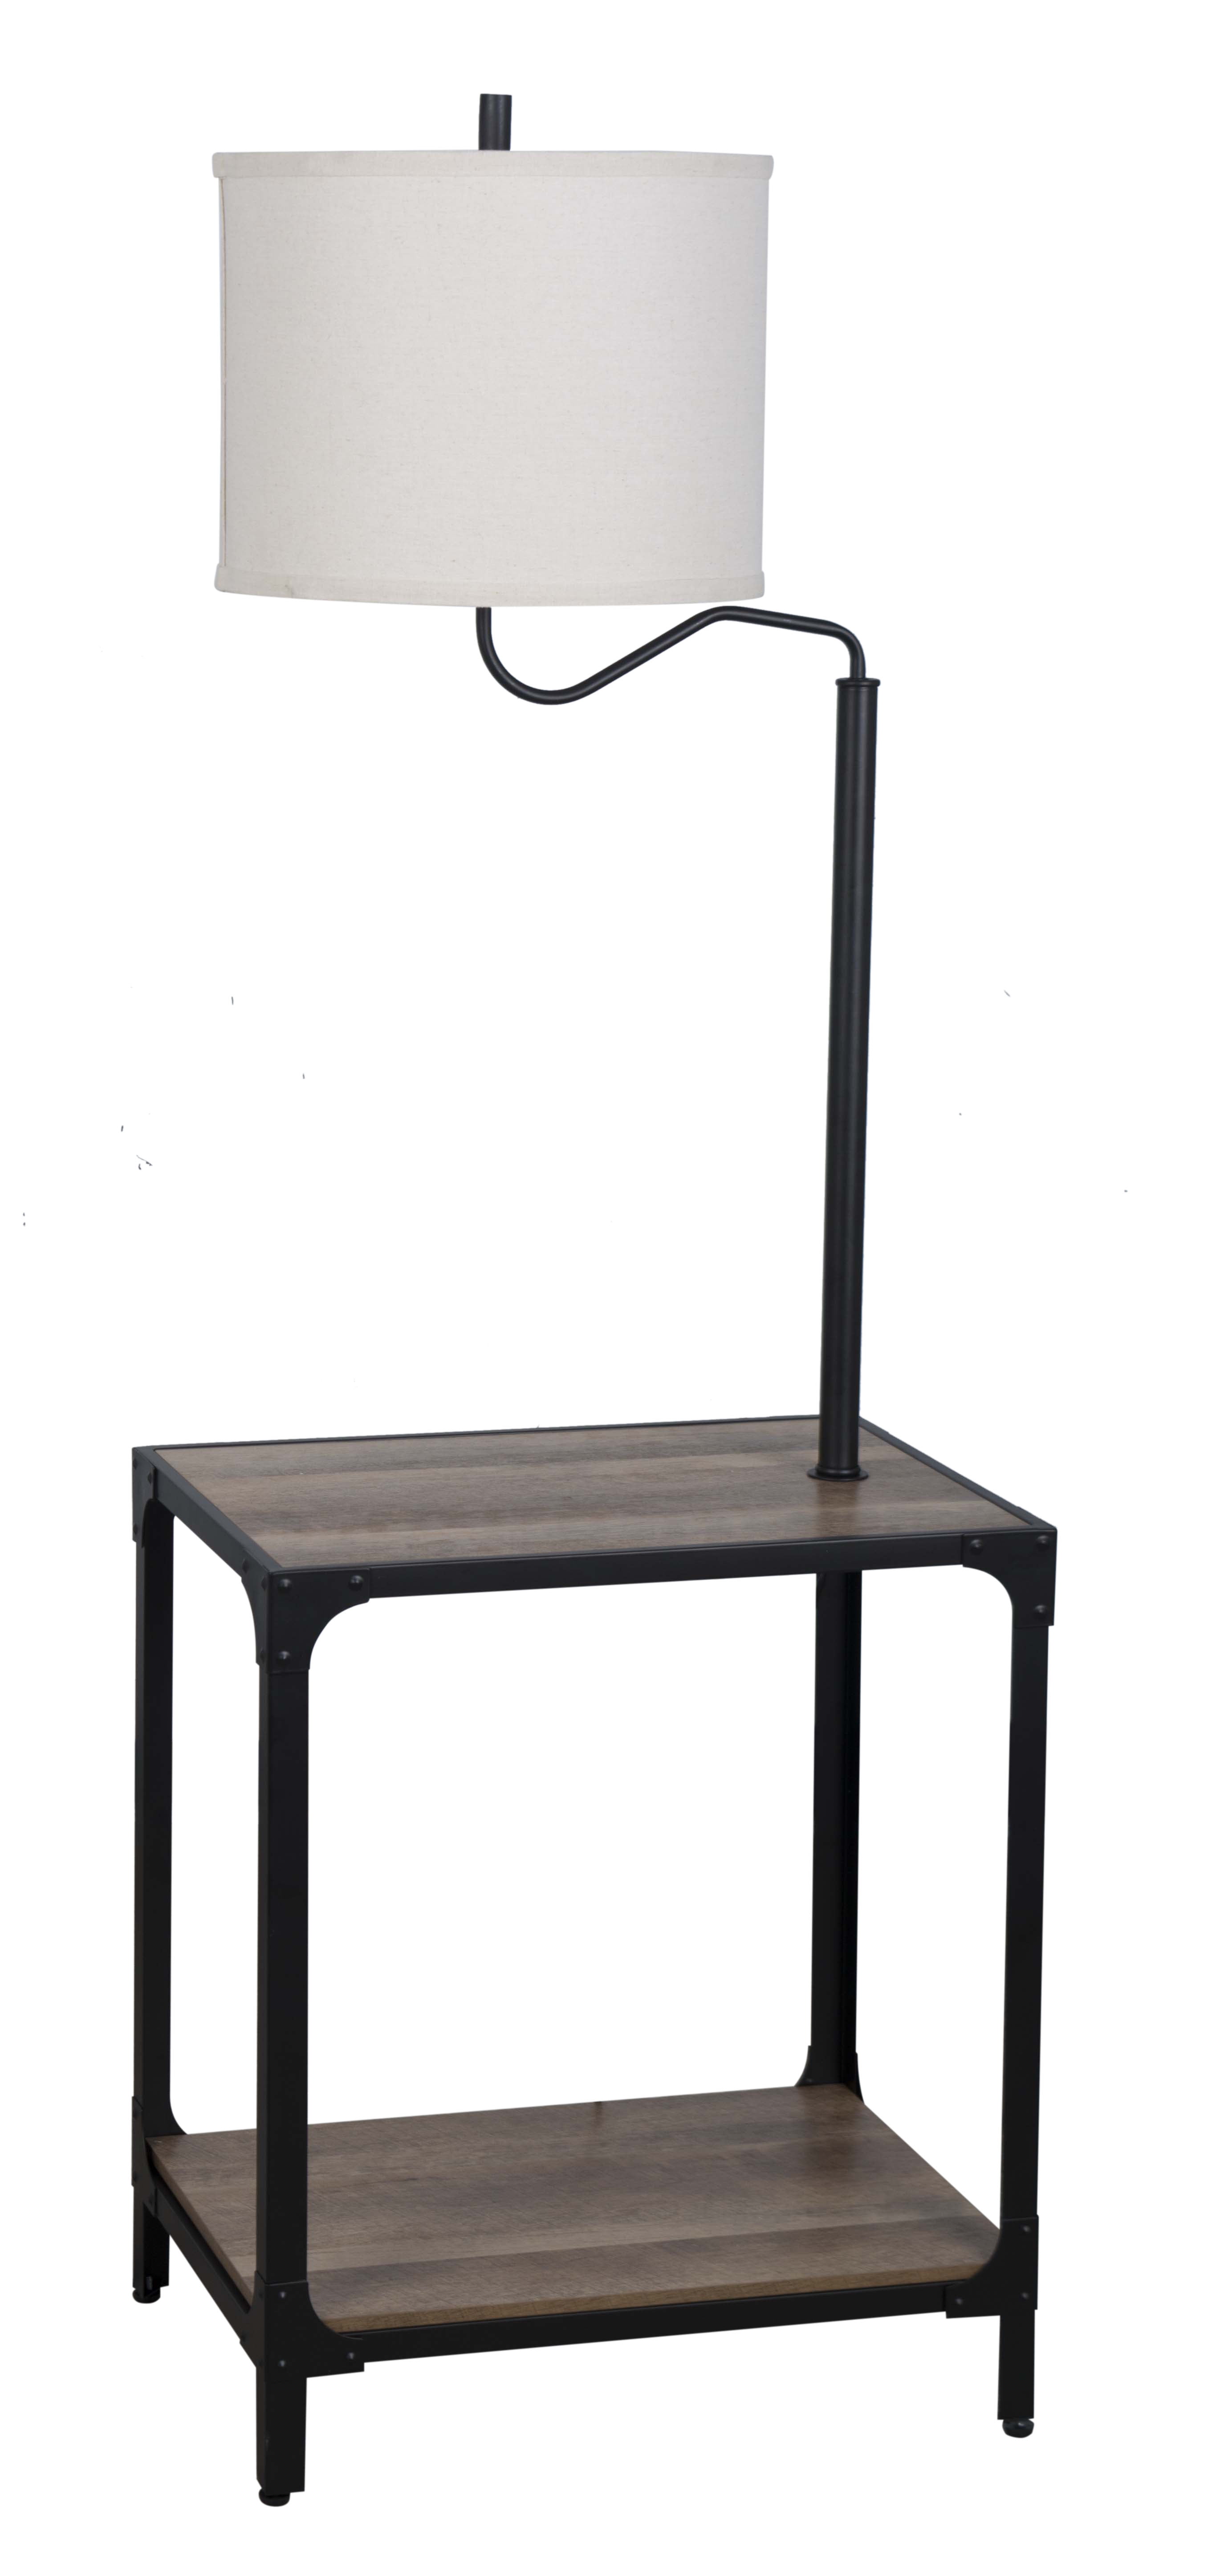 End Table Floor Lamp With Usb Port, How Tall Should A Lamp Be On An End Table